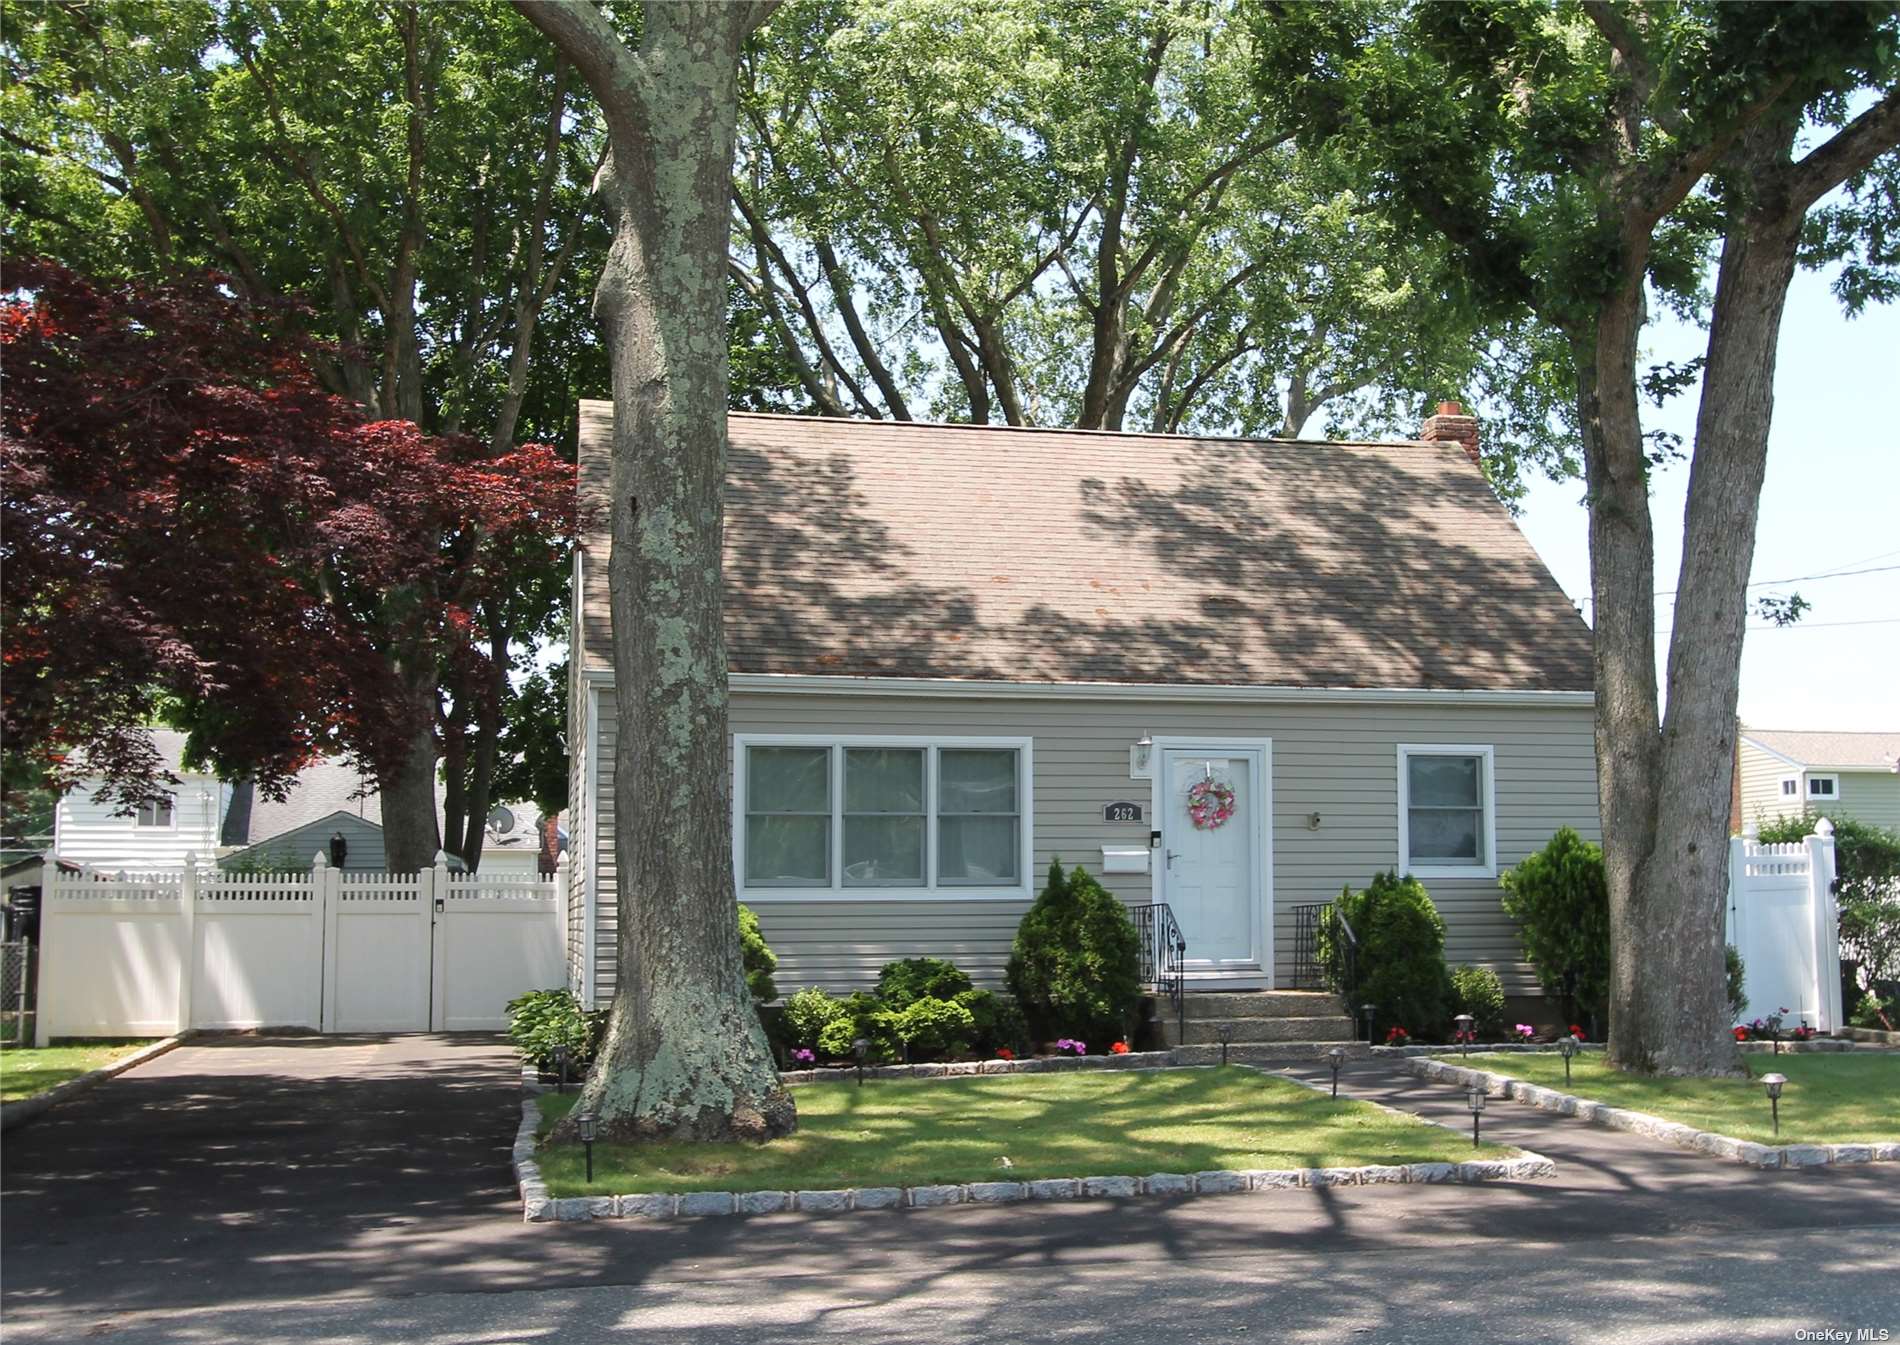 a front view of a house with a yard and tree s